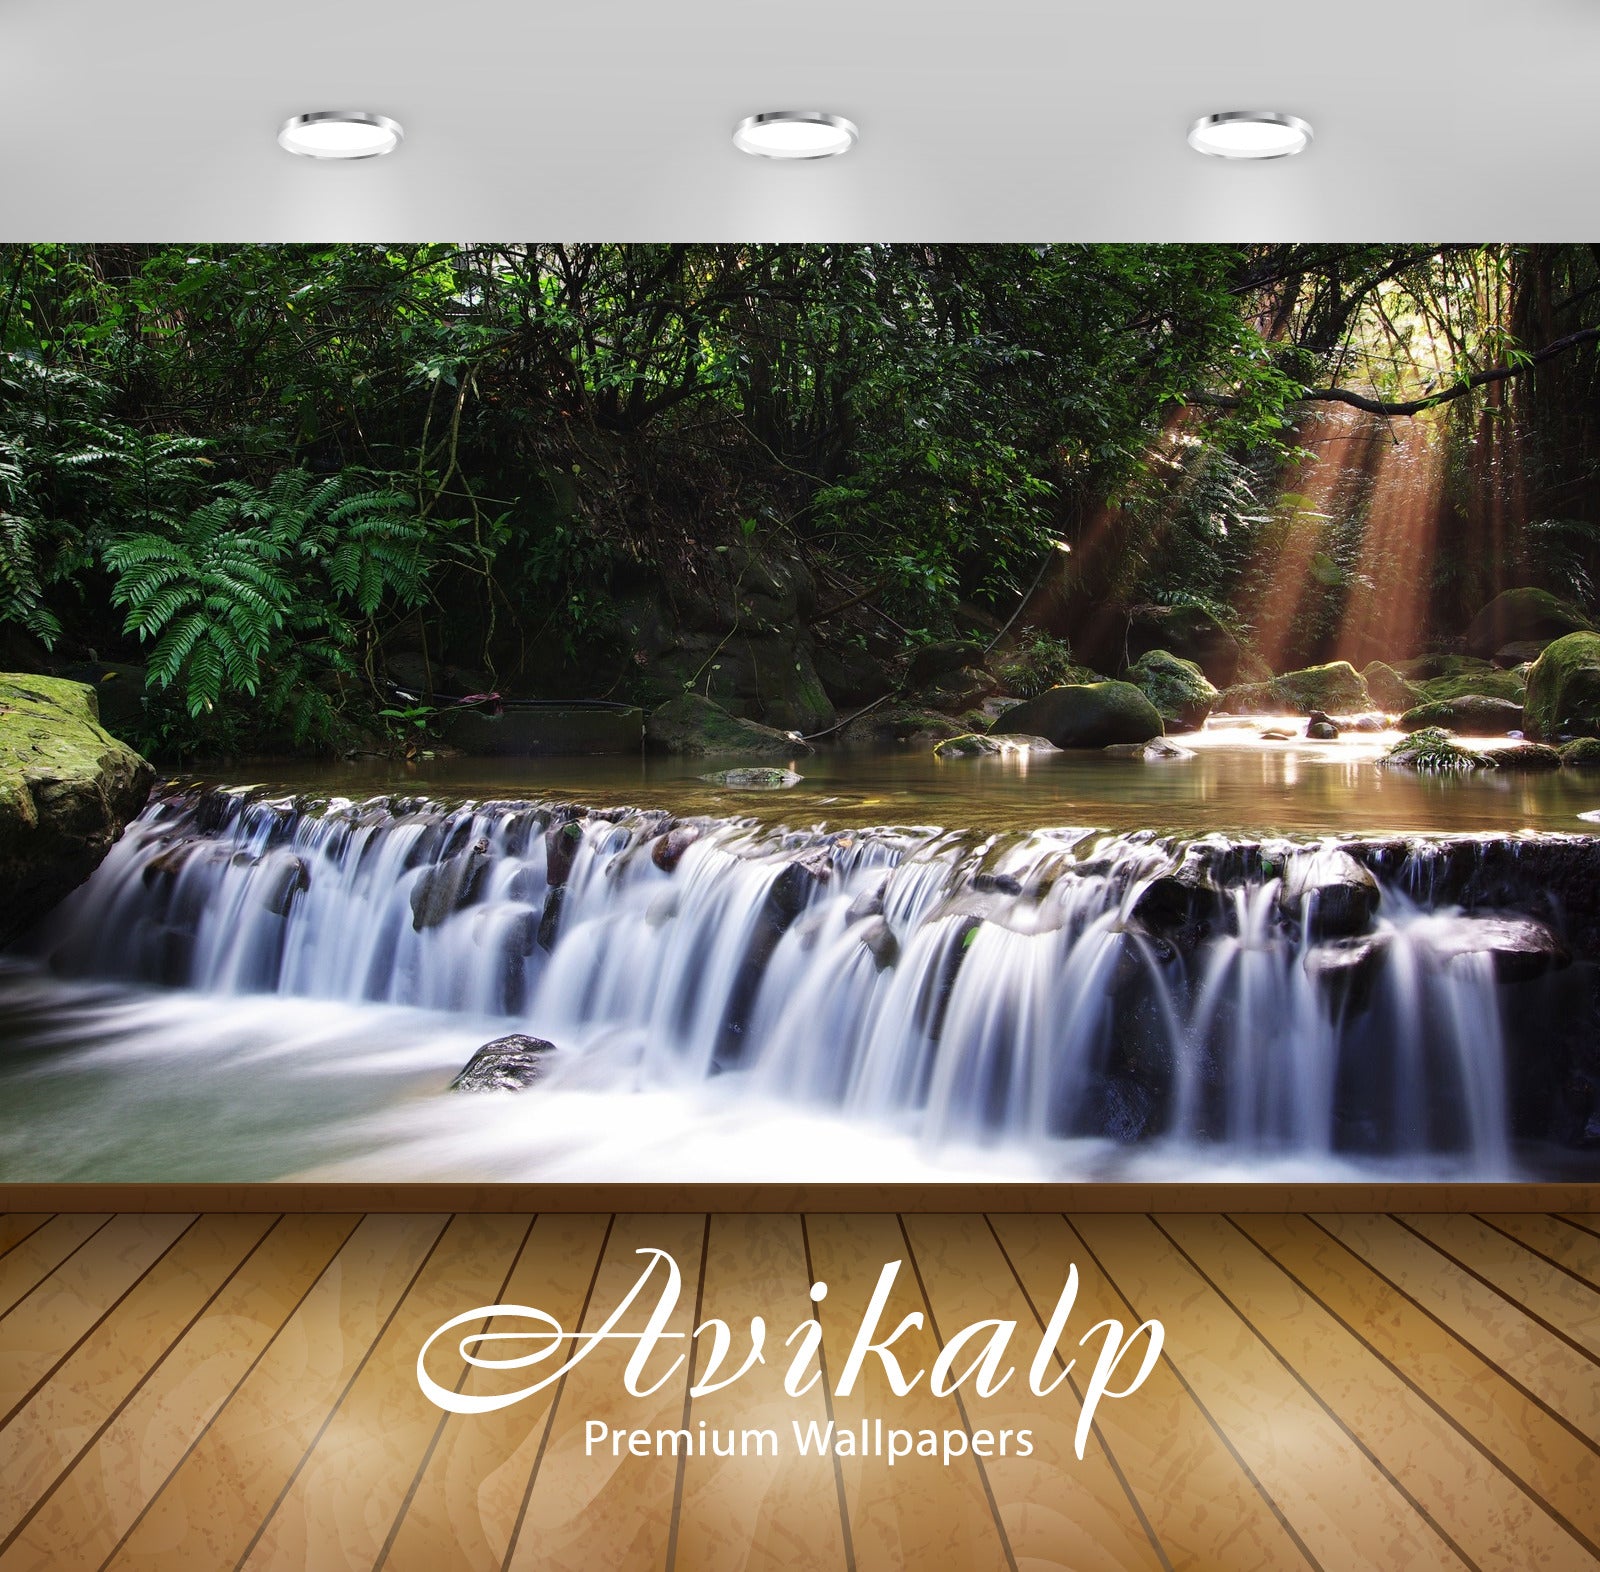 Avikalp Exclusive Awi1953 Wonder Waterfall Full HD Wallpapers for Living room, Hall, Kids Room, Kitc